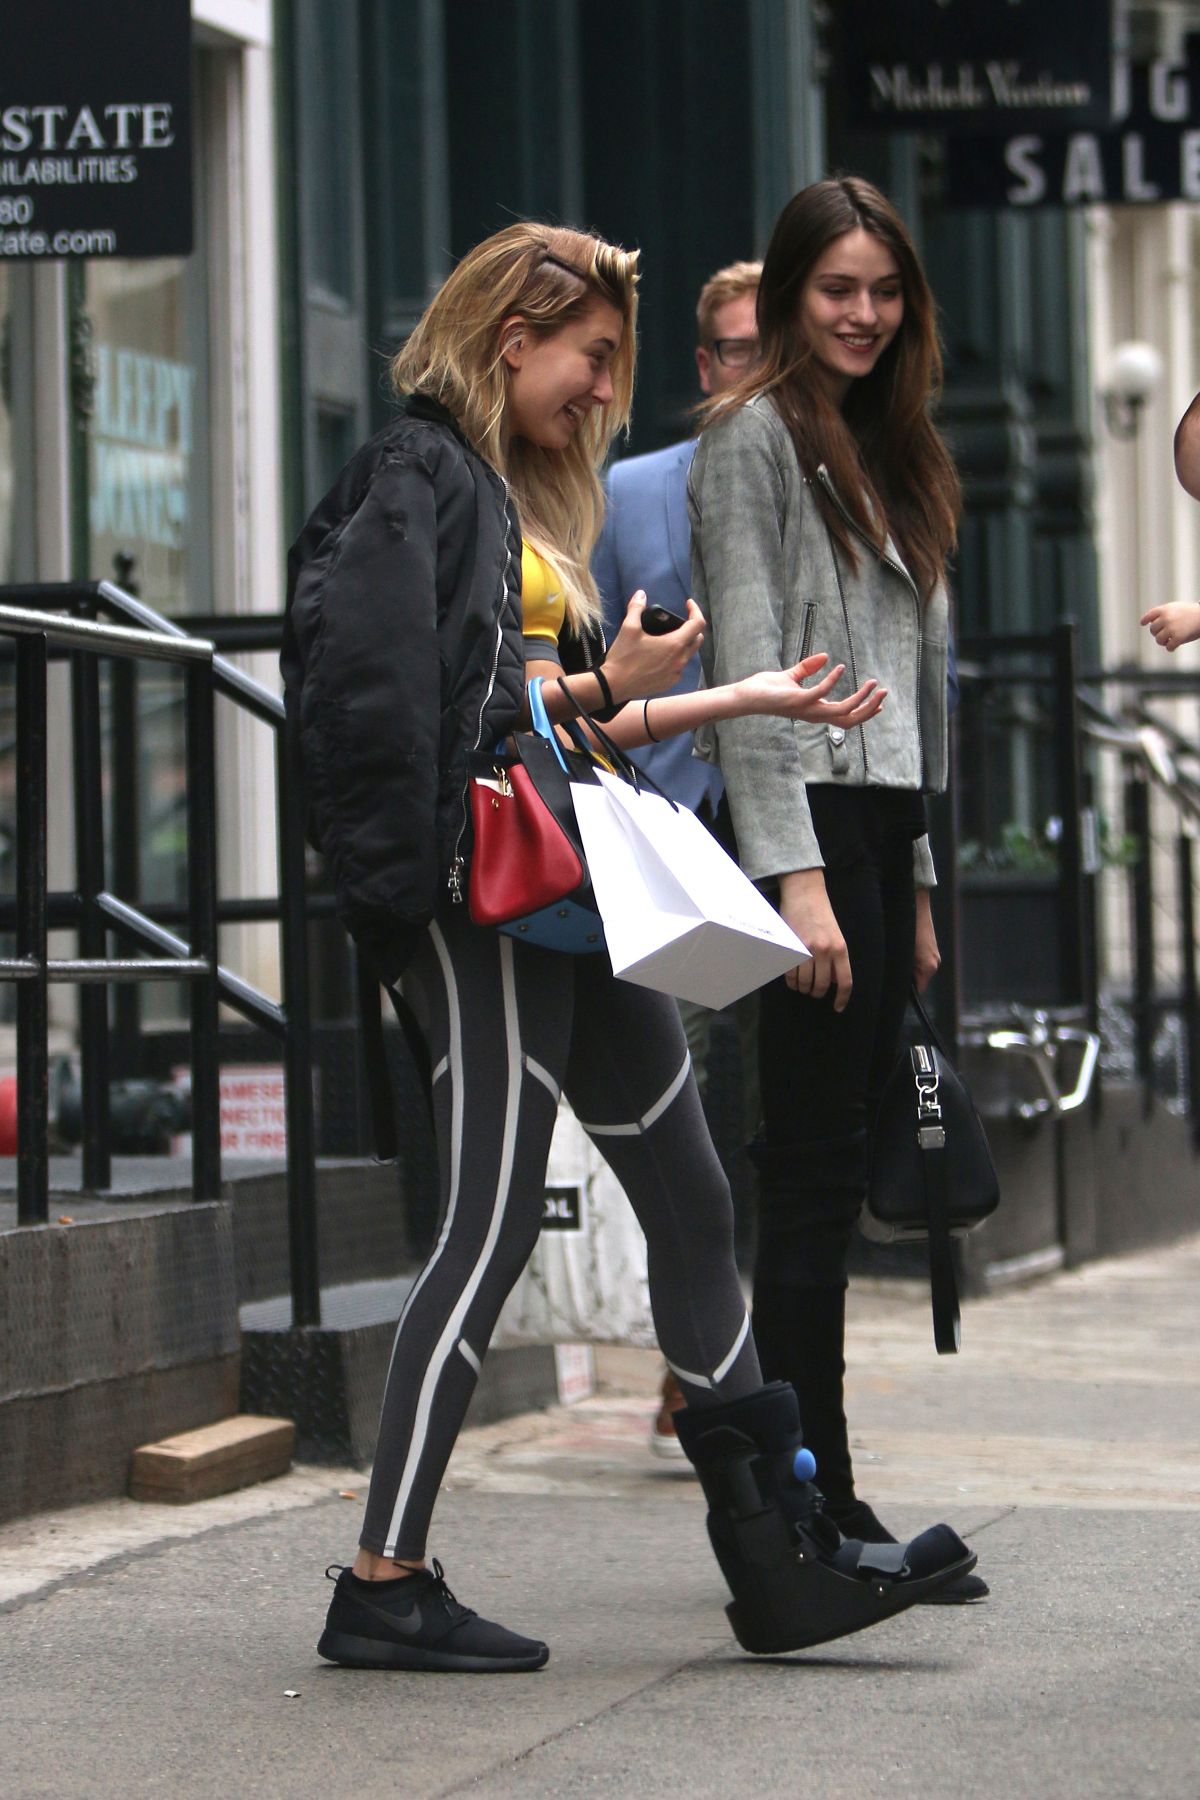 Hailey Baldwin Out and About in NYC May 23, 2016 – Star Style